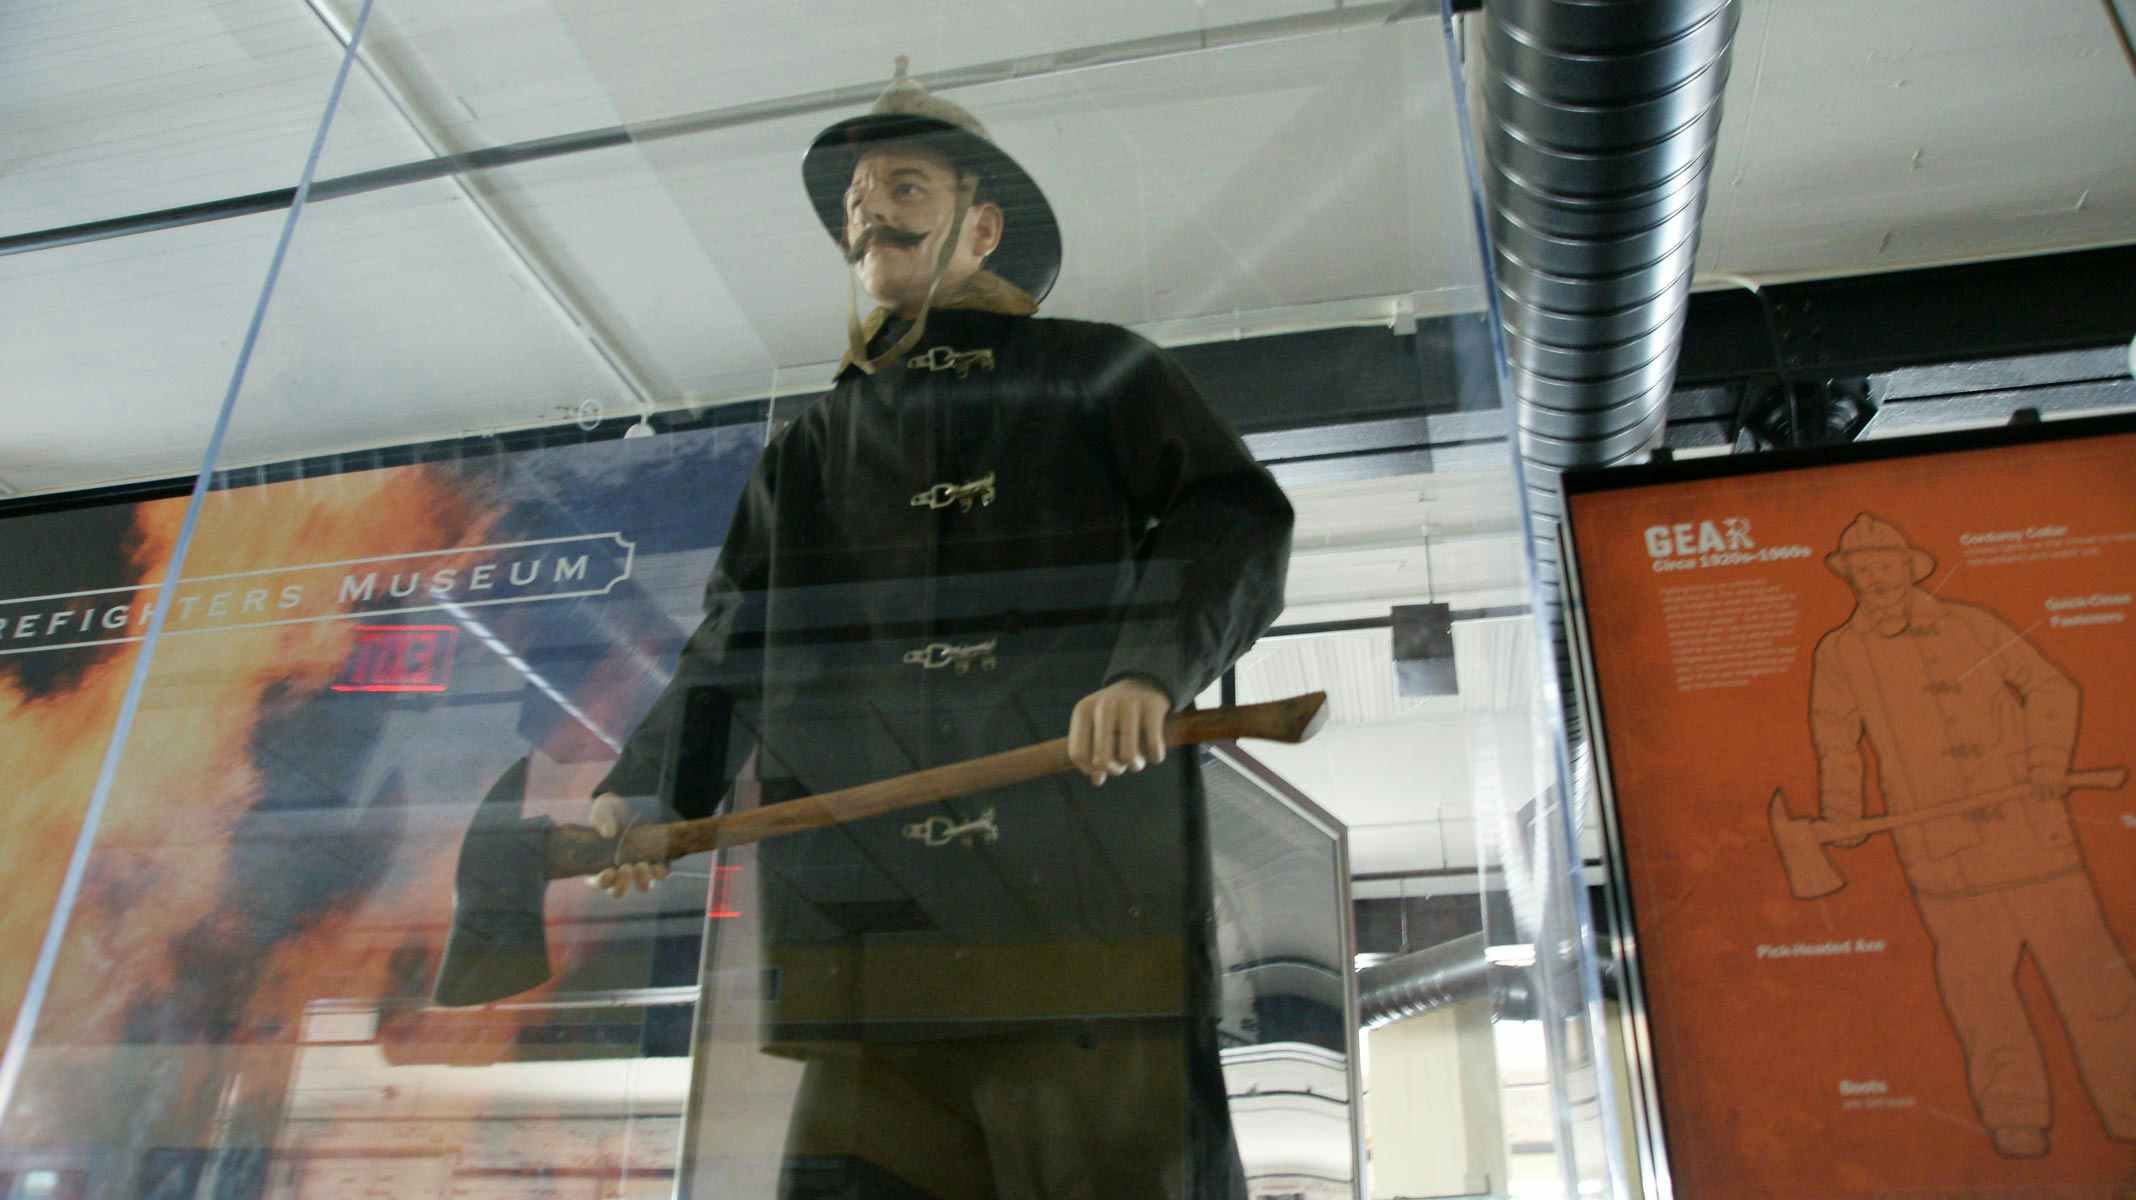 Tampa Bay Firefighter museum